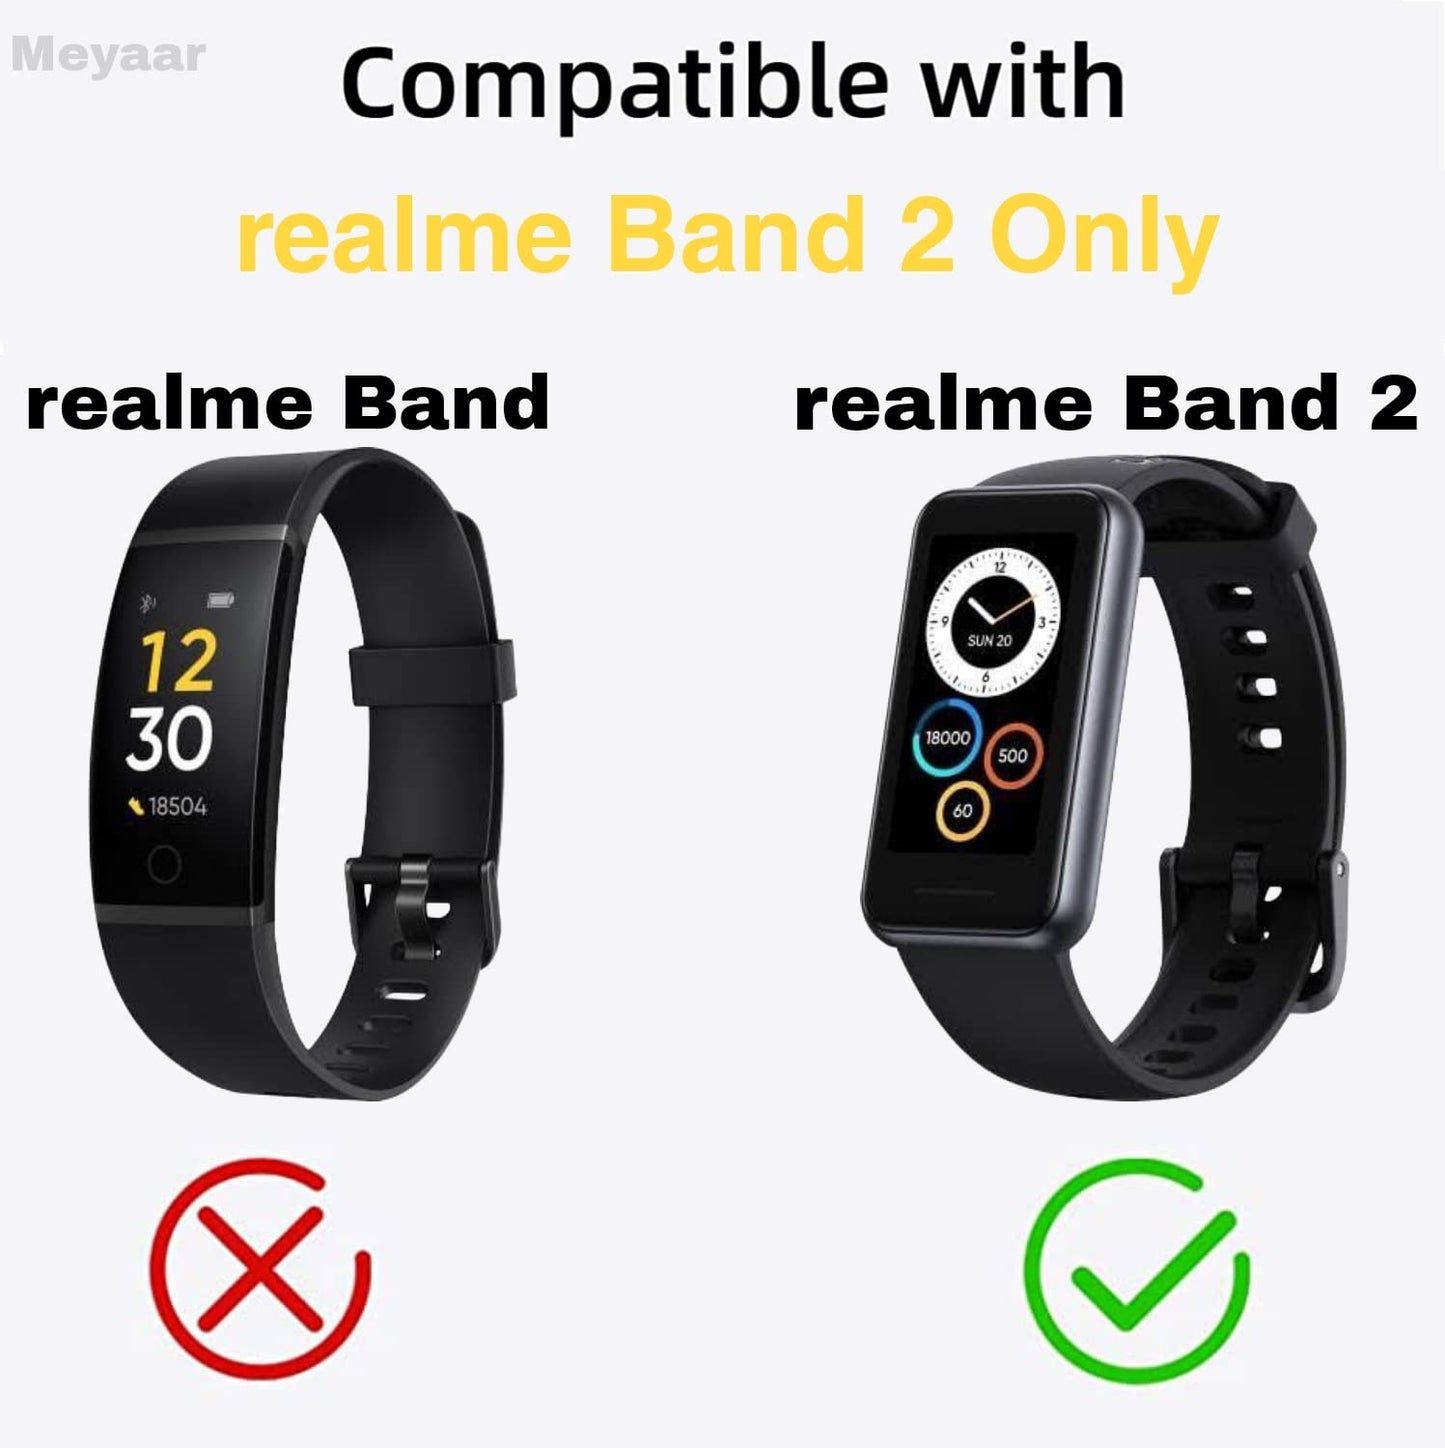 Meyaar Strap Band Only Compatible With realme Band 2 (Not For Any other Brand Watch) : (Tracker Not Included) (Strap Only) (Silicone (Black))